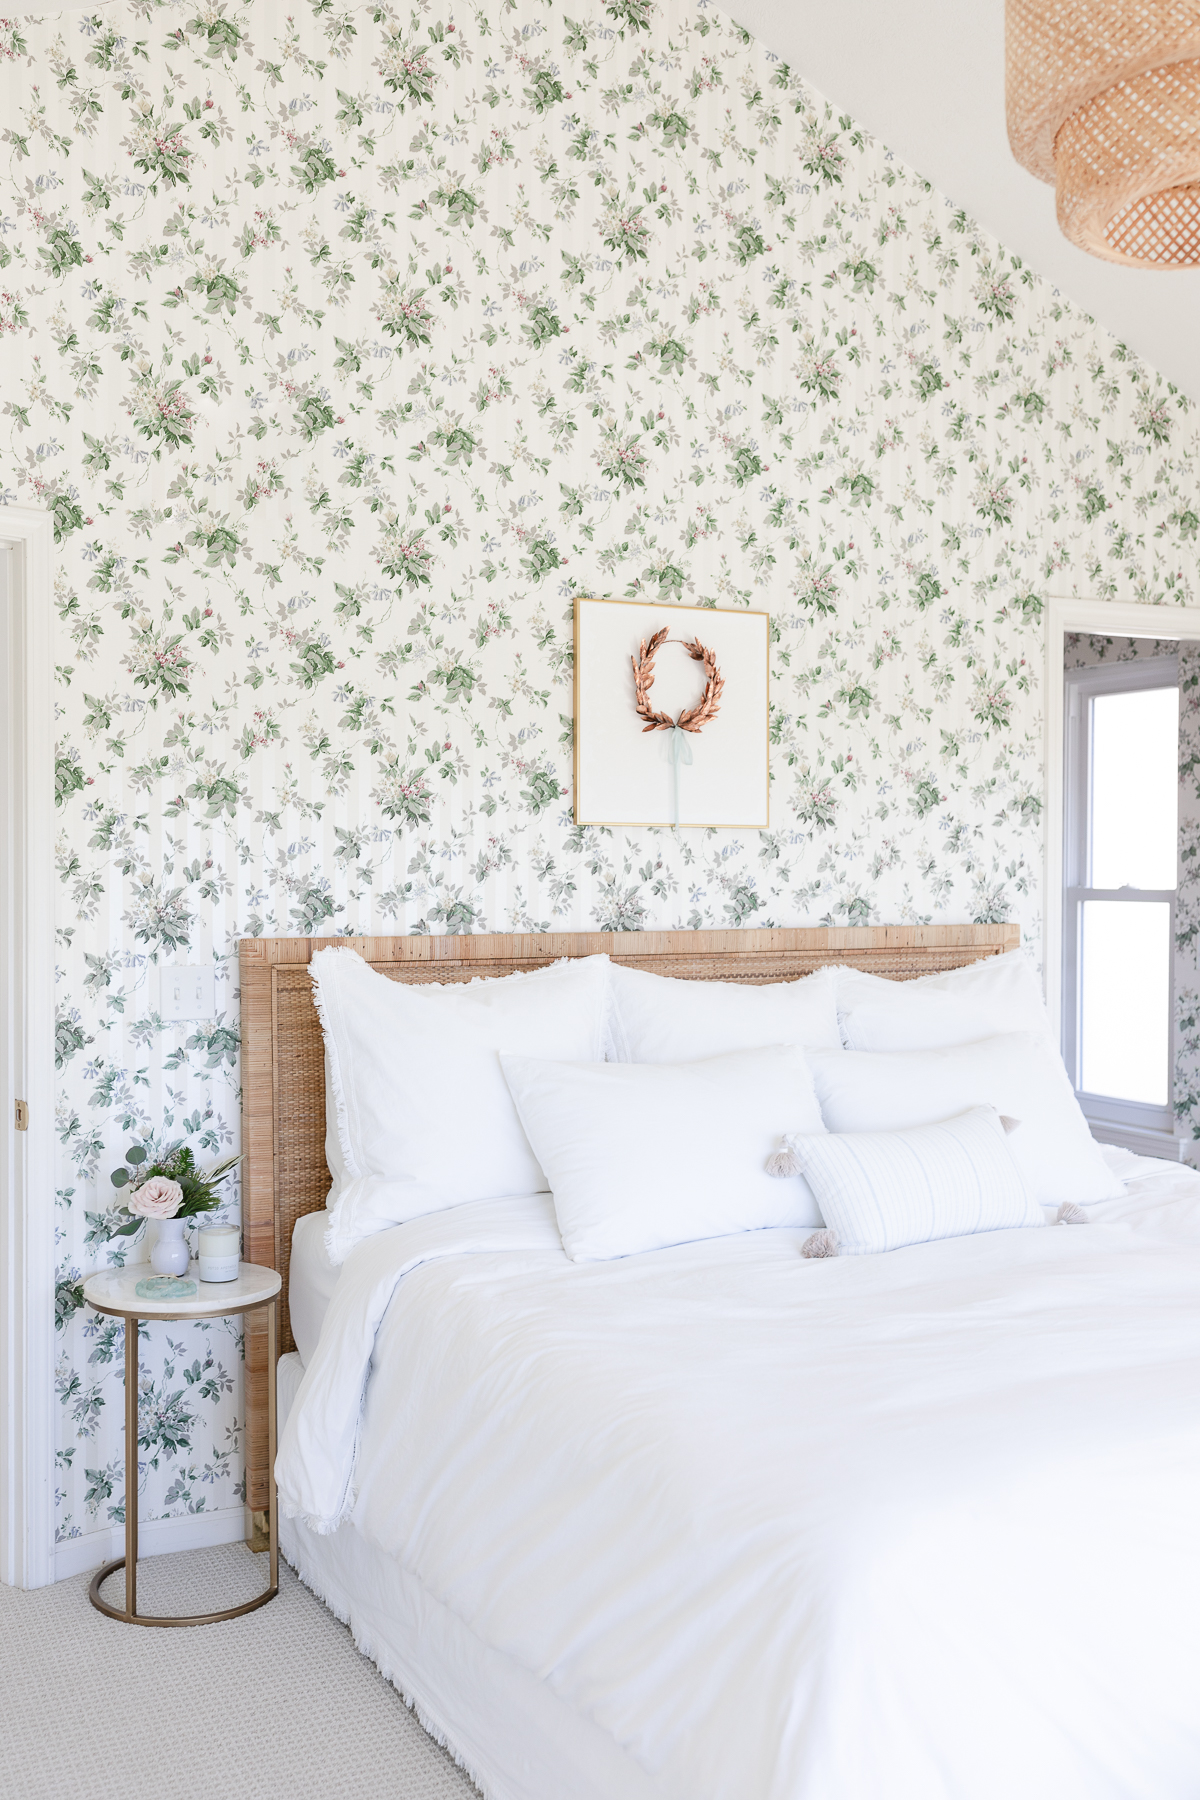 A white bedroom with dated green floral wallpaper.